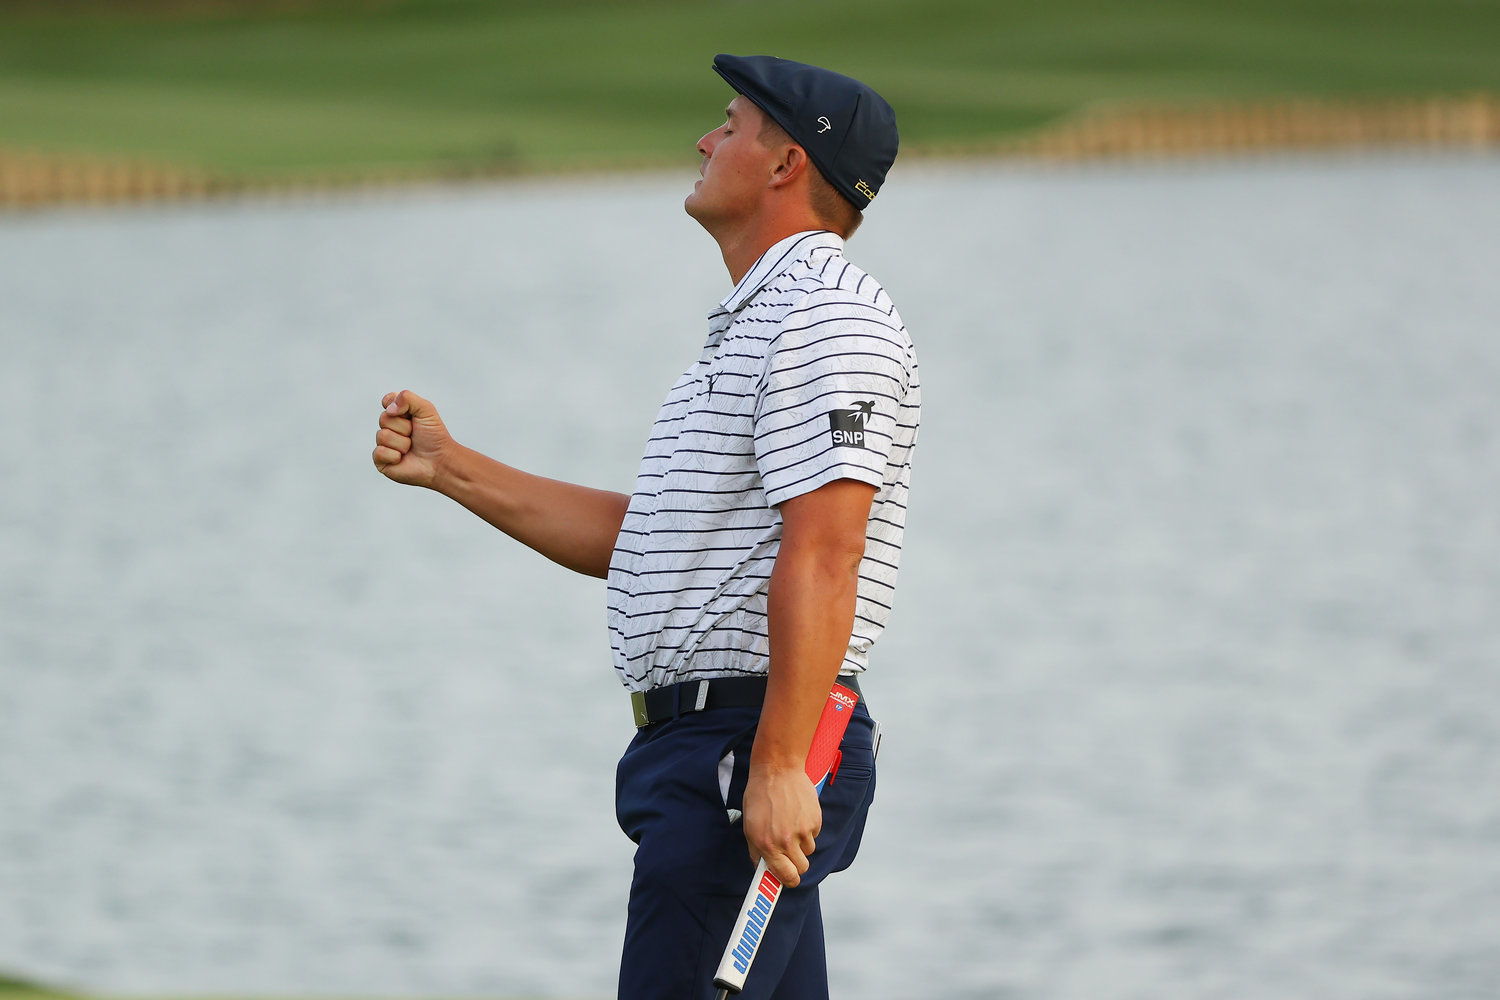 PONTE VEDRA BEACH, FLORIDA - MARCH 13: Bryson DeChambeau of the United States celebrates after finishing on the 18th green during the third round of THE PLAYERS Championship on THE PLAYERS Stadium Course at TPC Sawgrass on March 13, 2021 in Ponte Vedra Beach, Florida. (Photo by Kevin C. Cox/Getty Images)